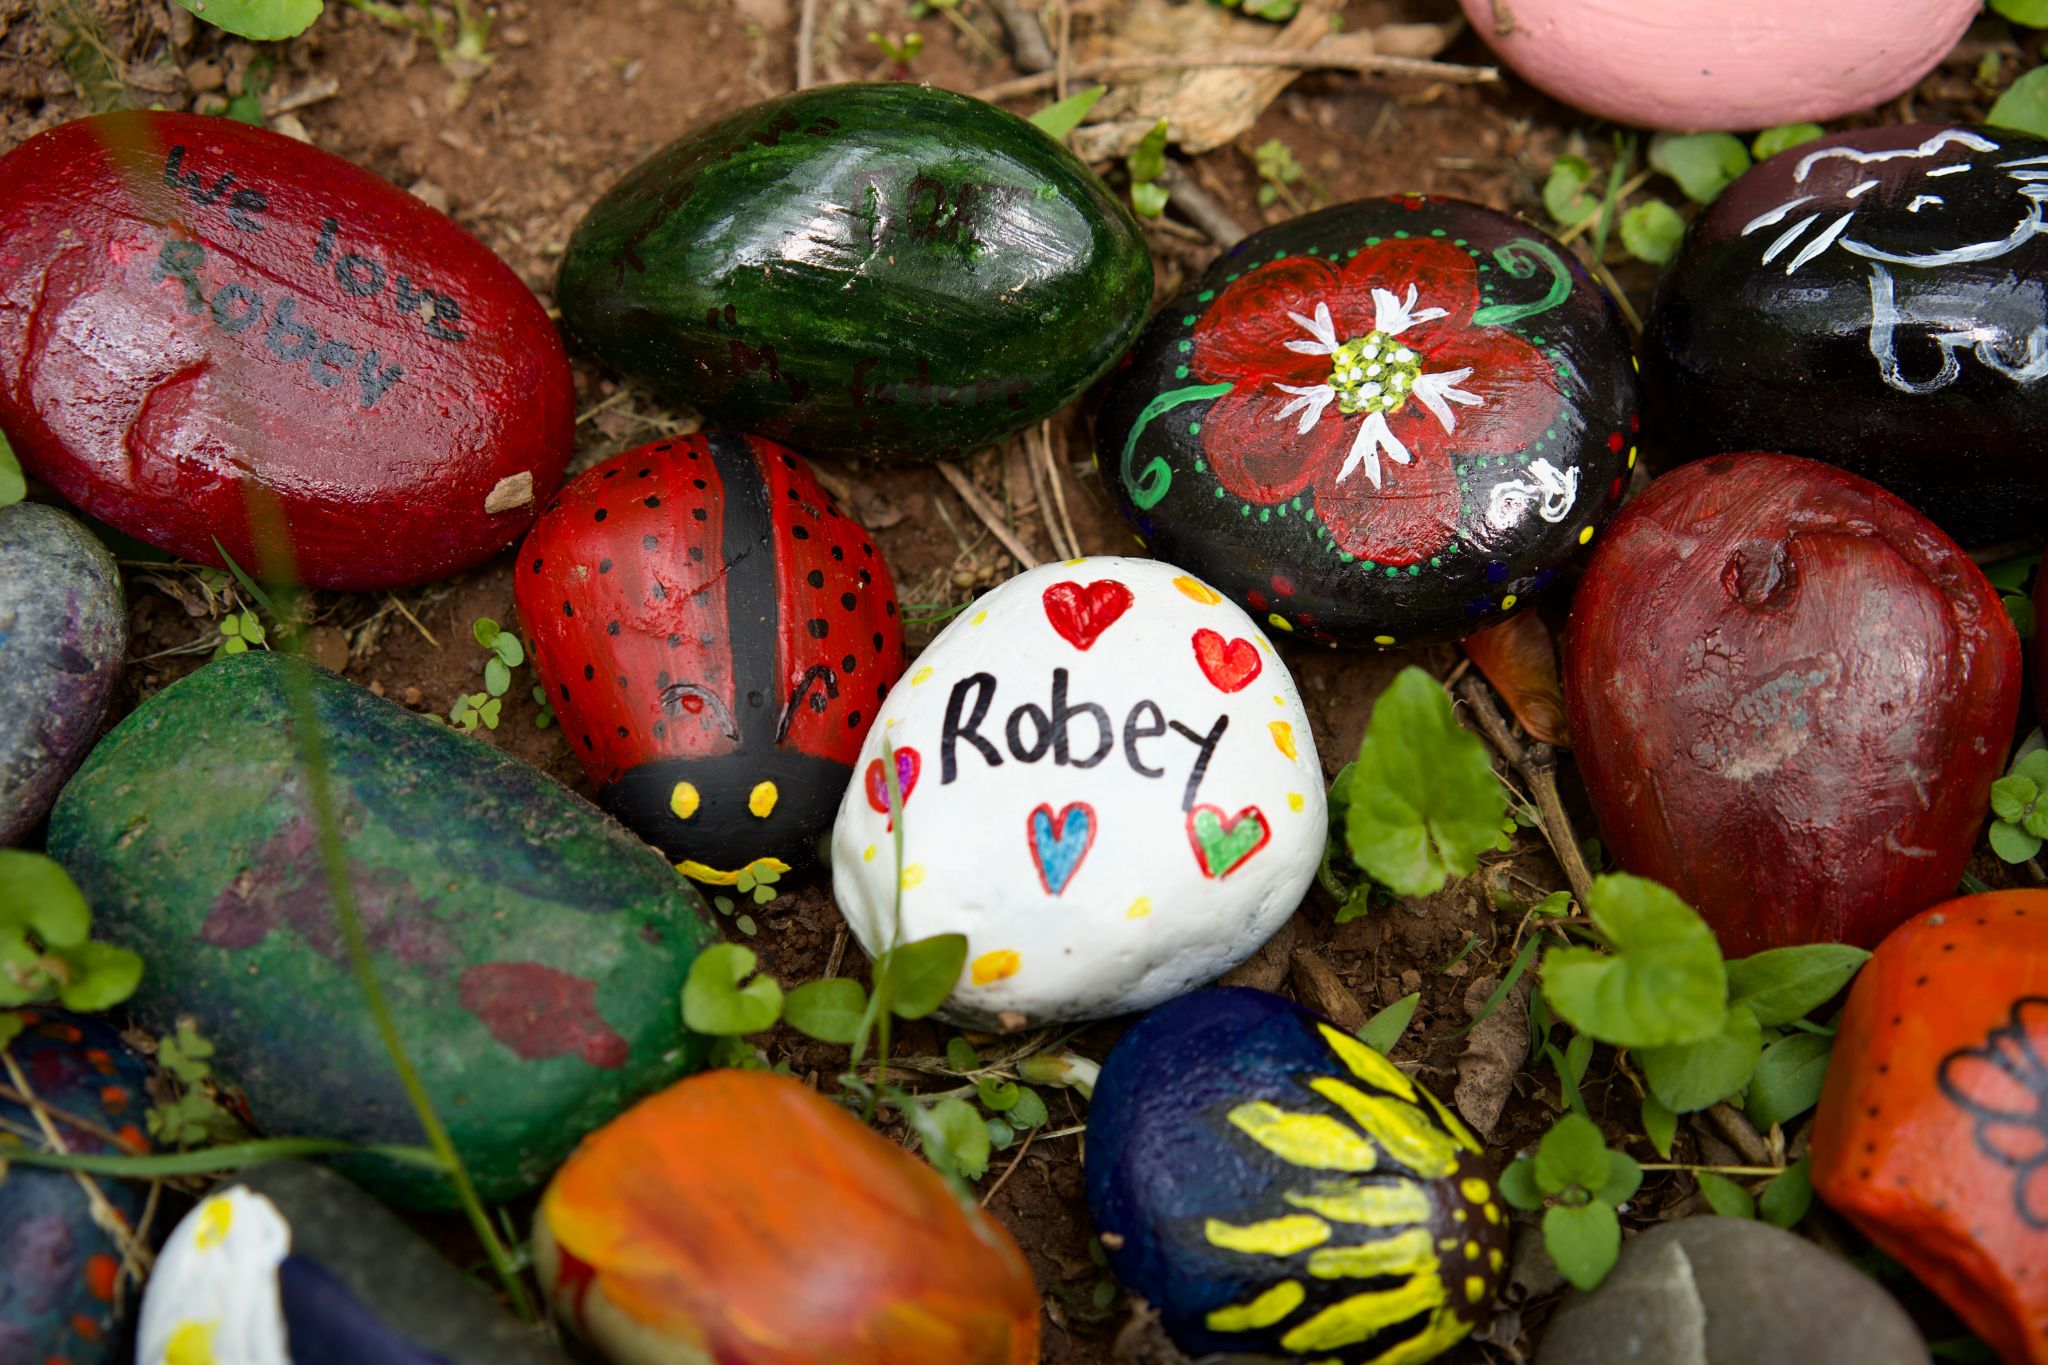 Painted rocks and one rock with "Robey" painted on it